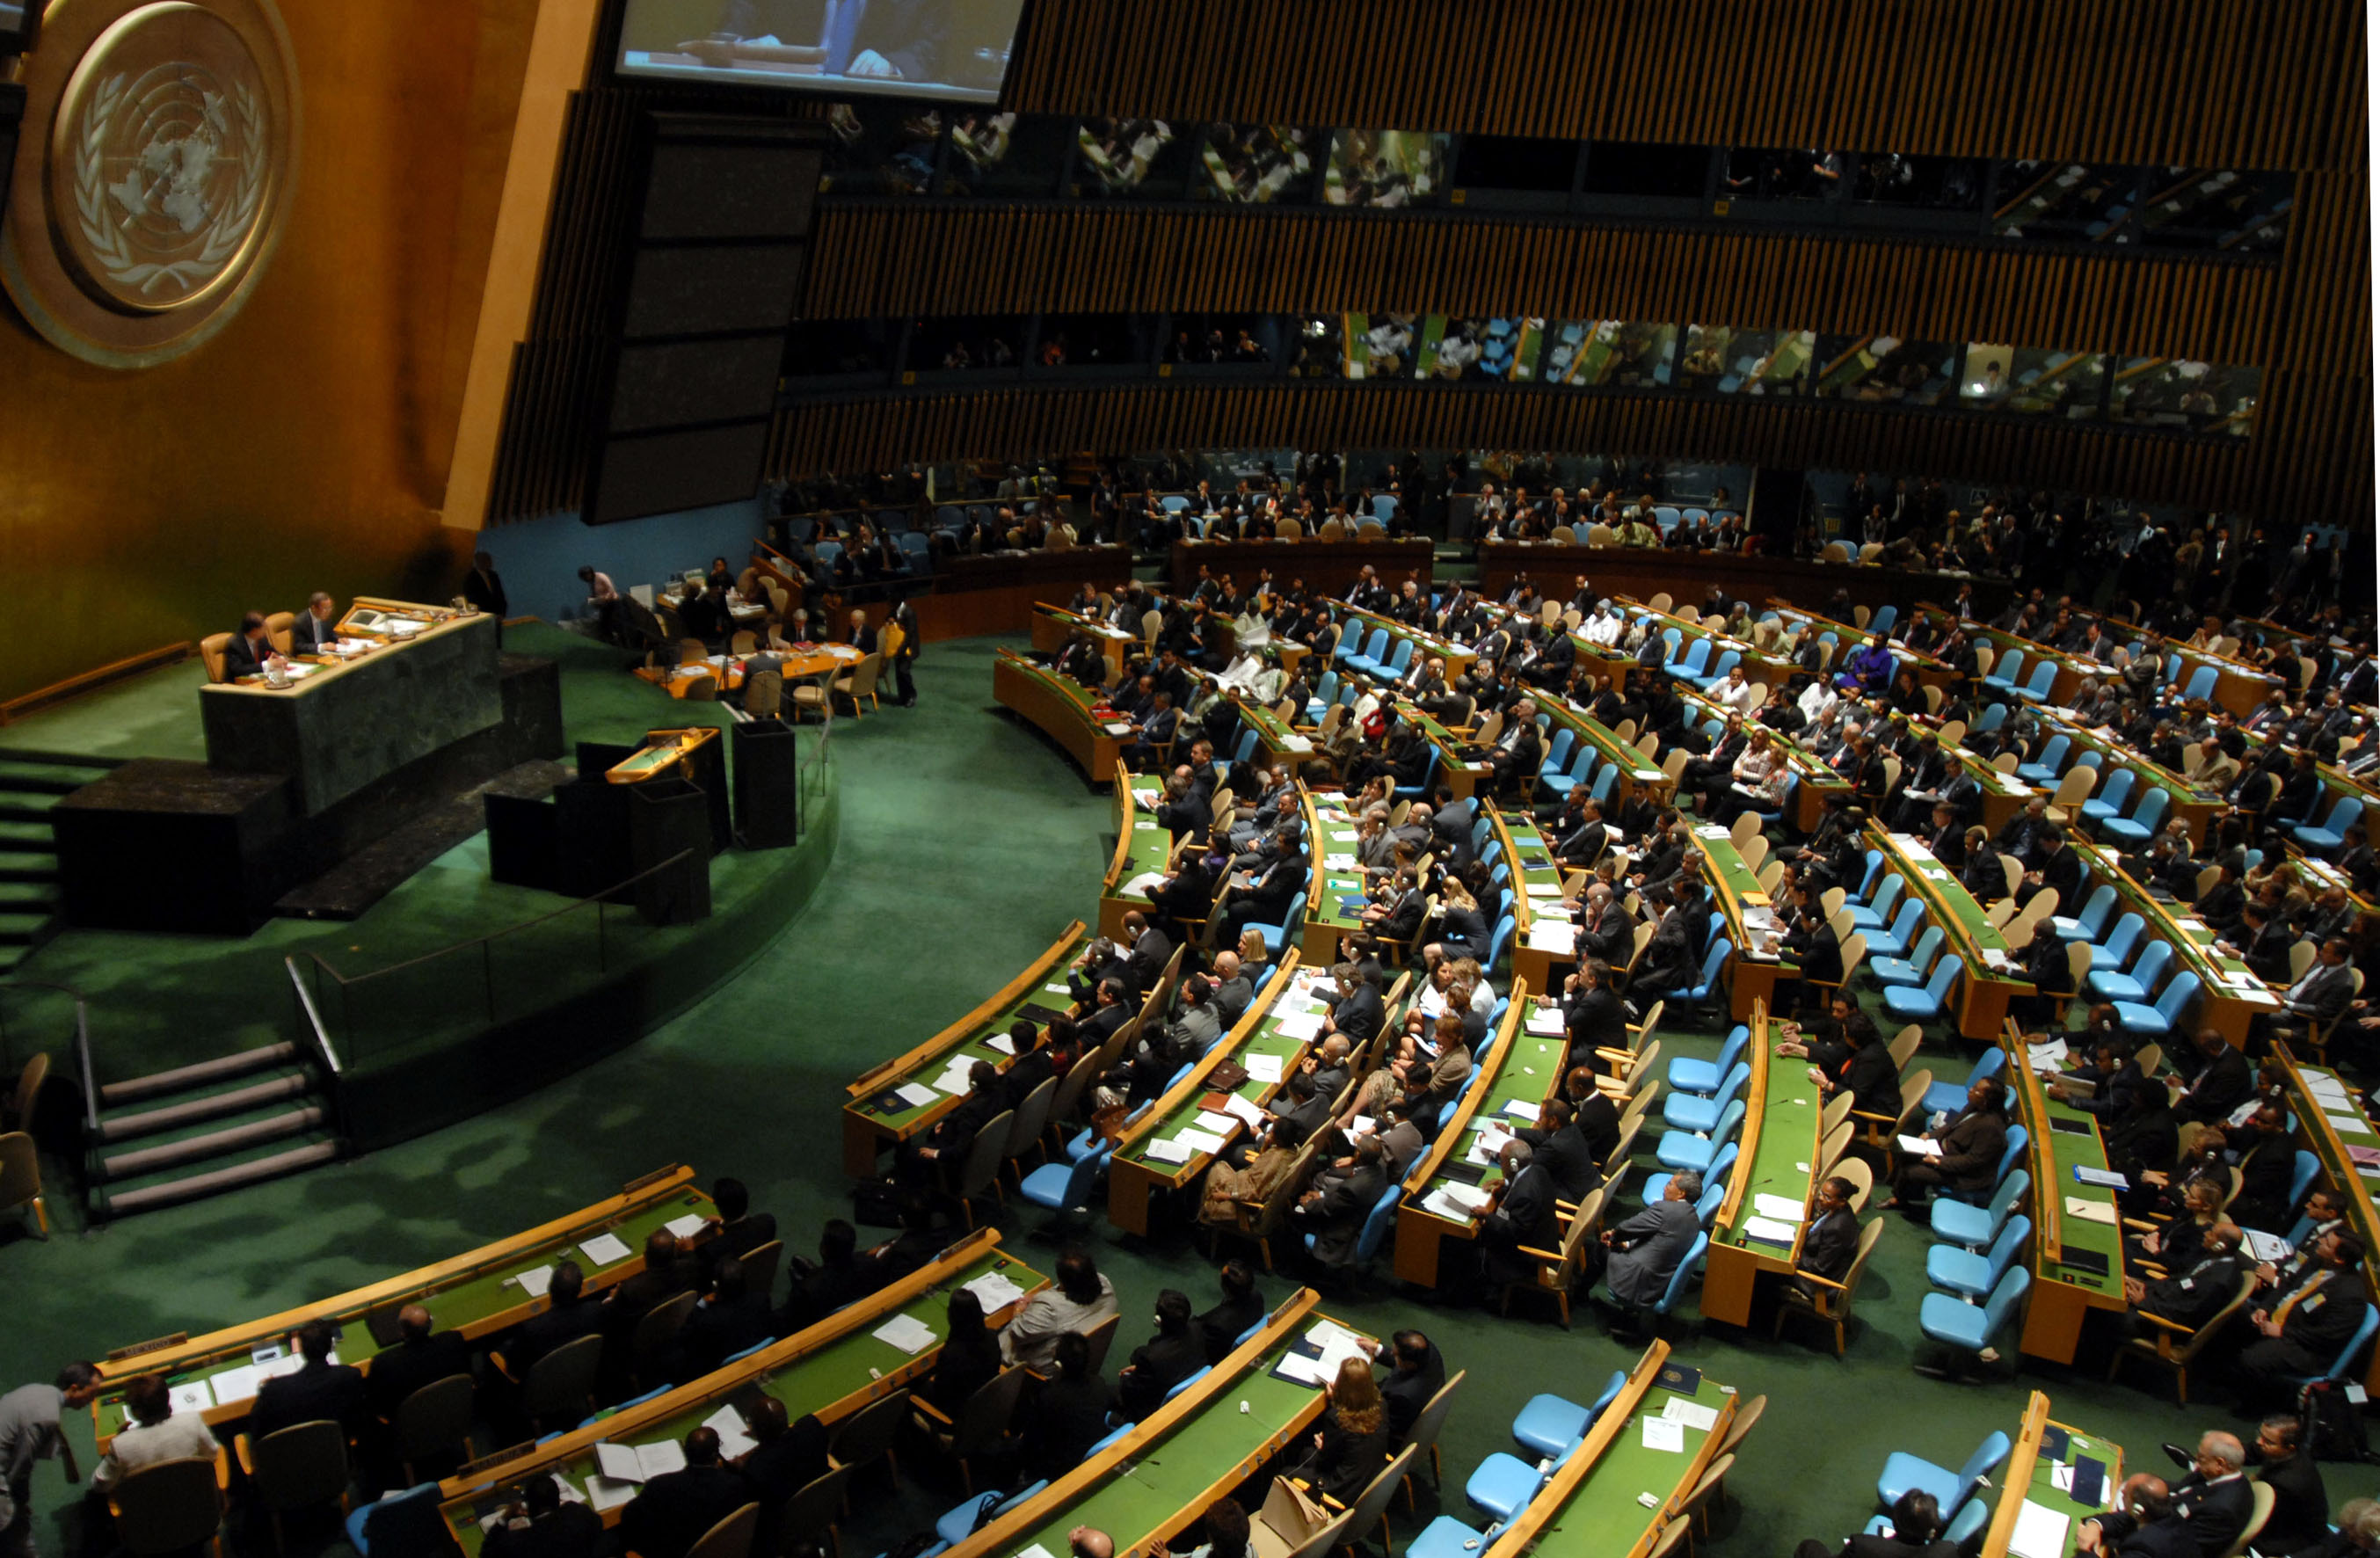 UN_meeting_on_environment_at_General_Assembly.jpg